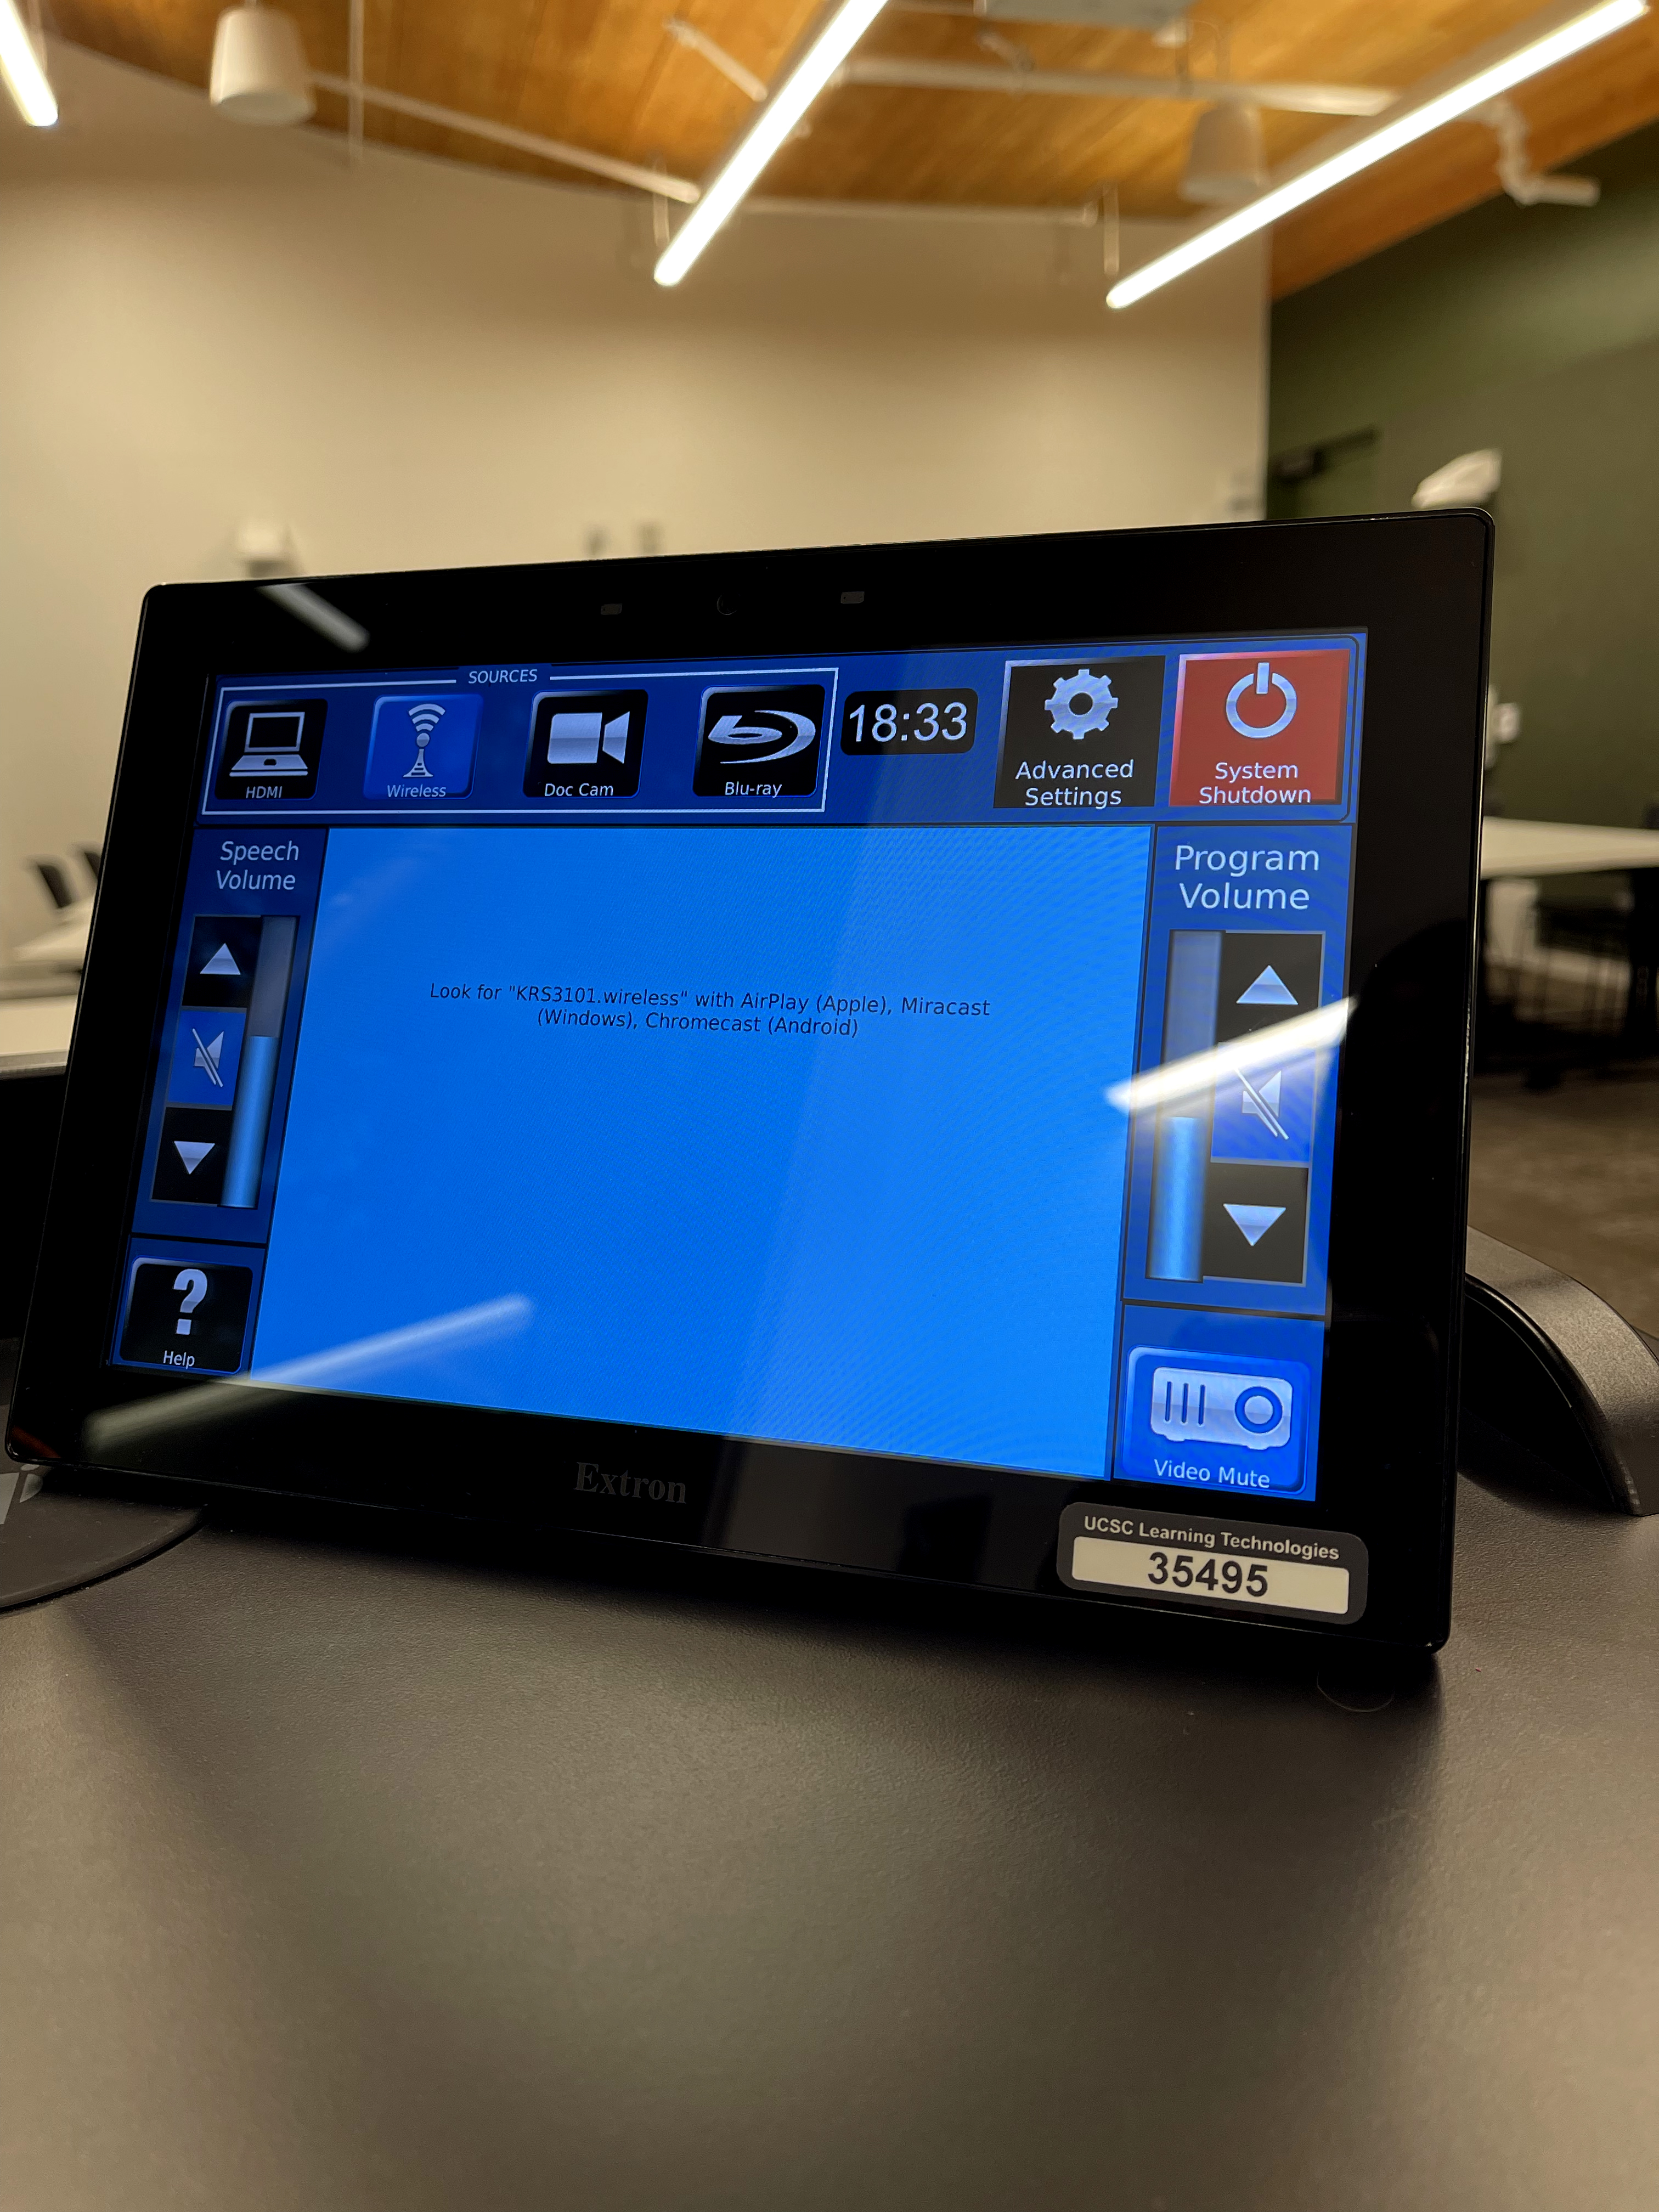 Image of the Instructor's view of the touch panel in Kresge 3301